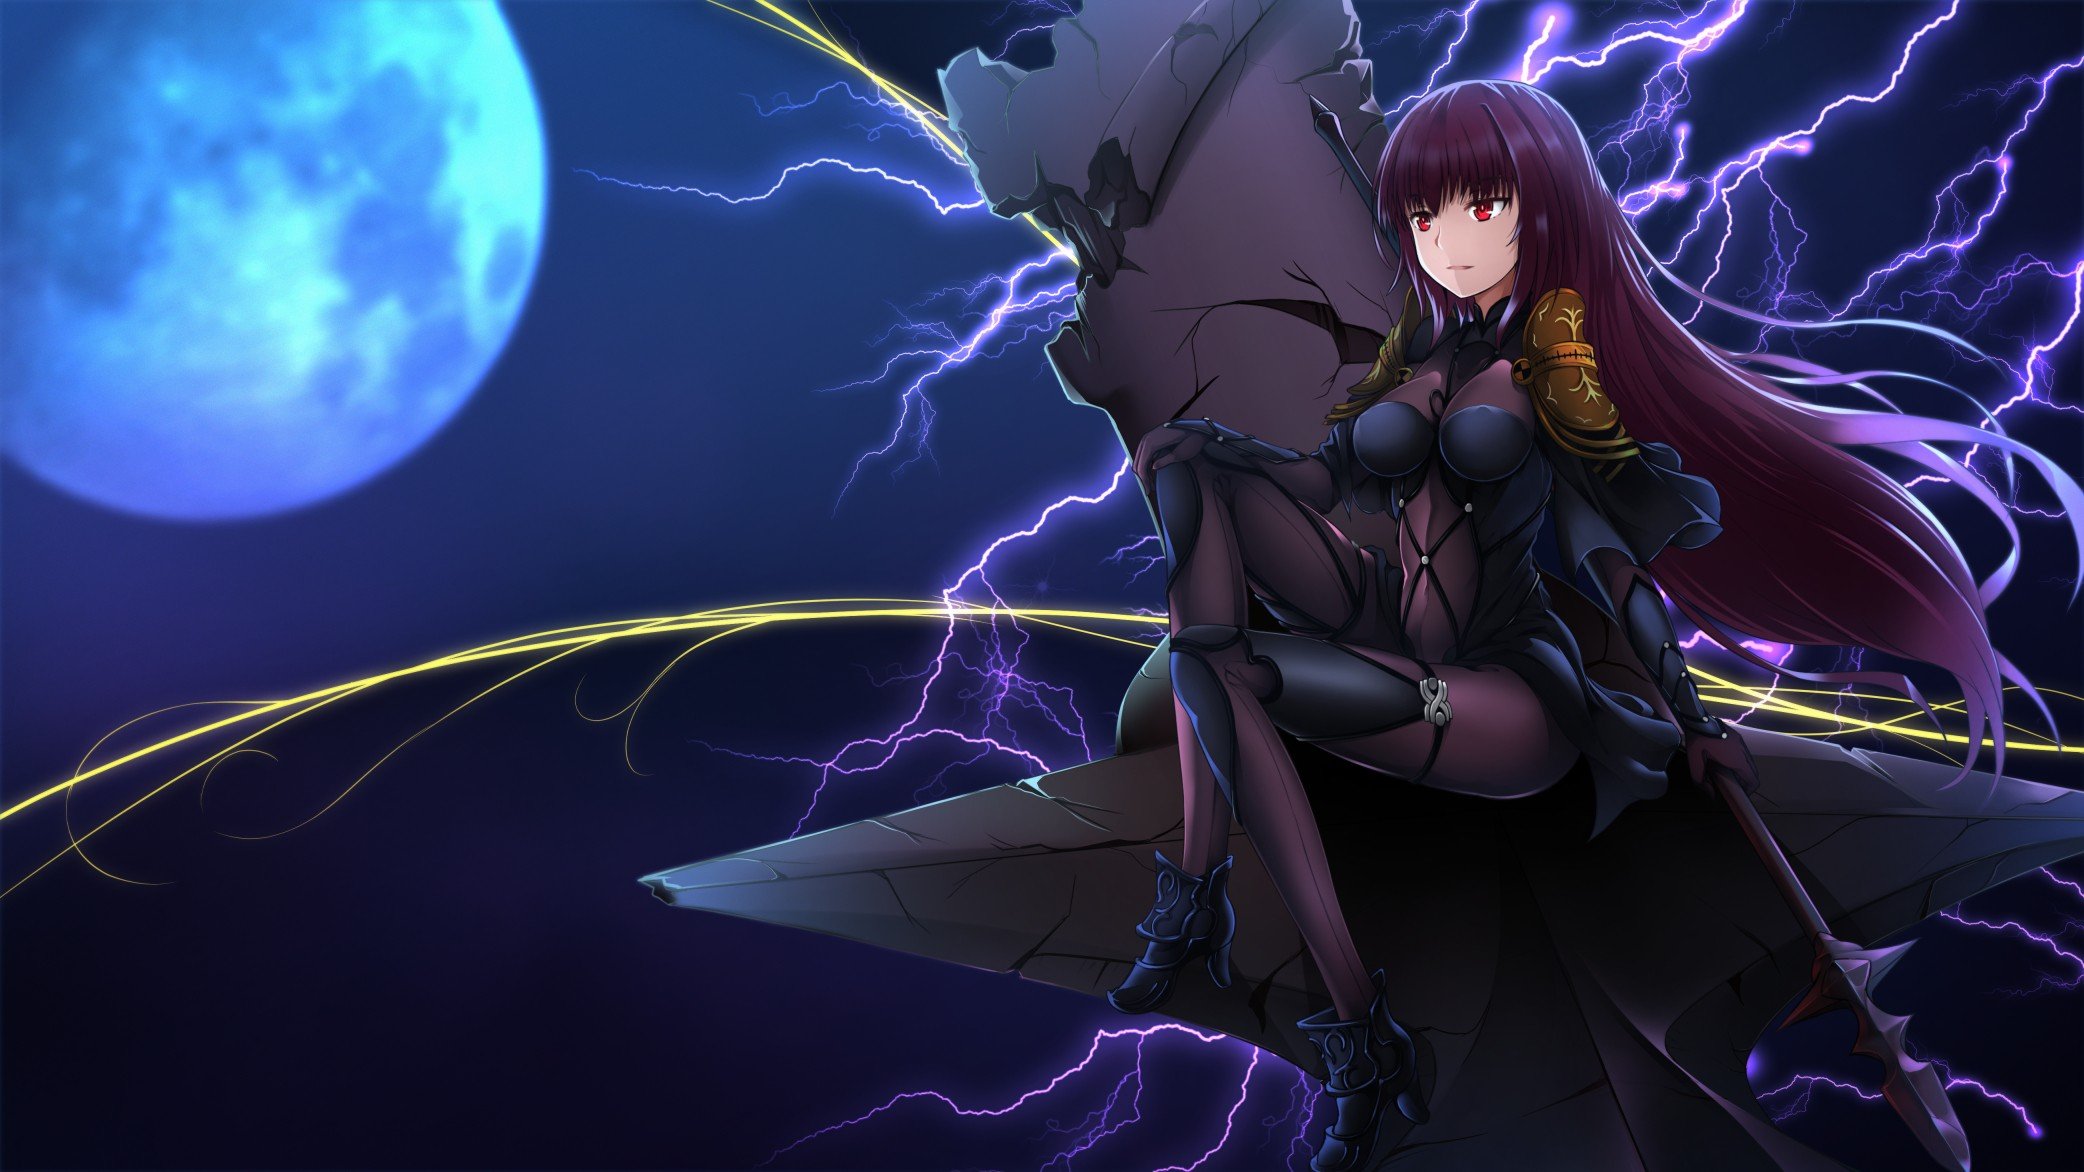 long hair, Purple hair, Red eyes, Bodysuit, Fate Grand Order, Fate Series, Moon, Night, Tight clothing, Spear, Weapon, Lightning Wallpaper